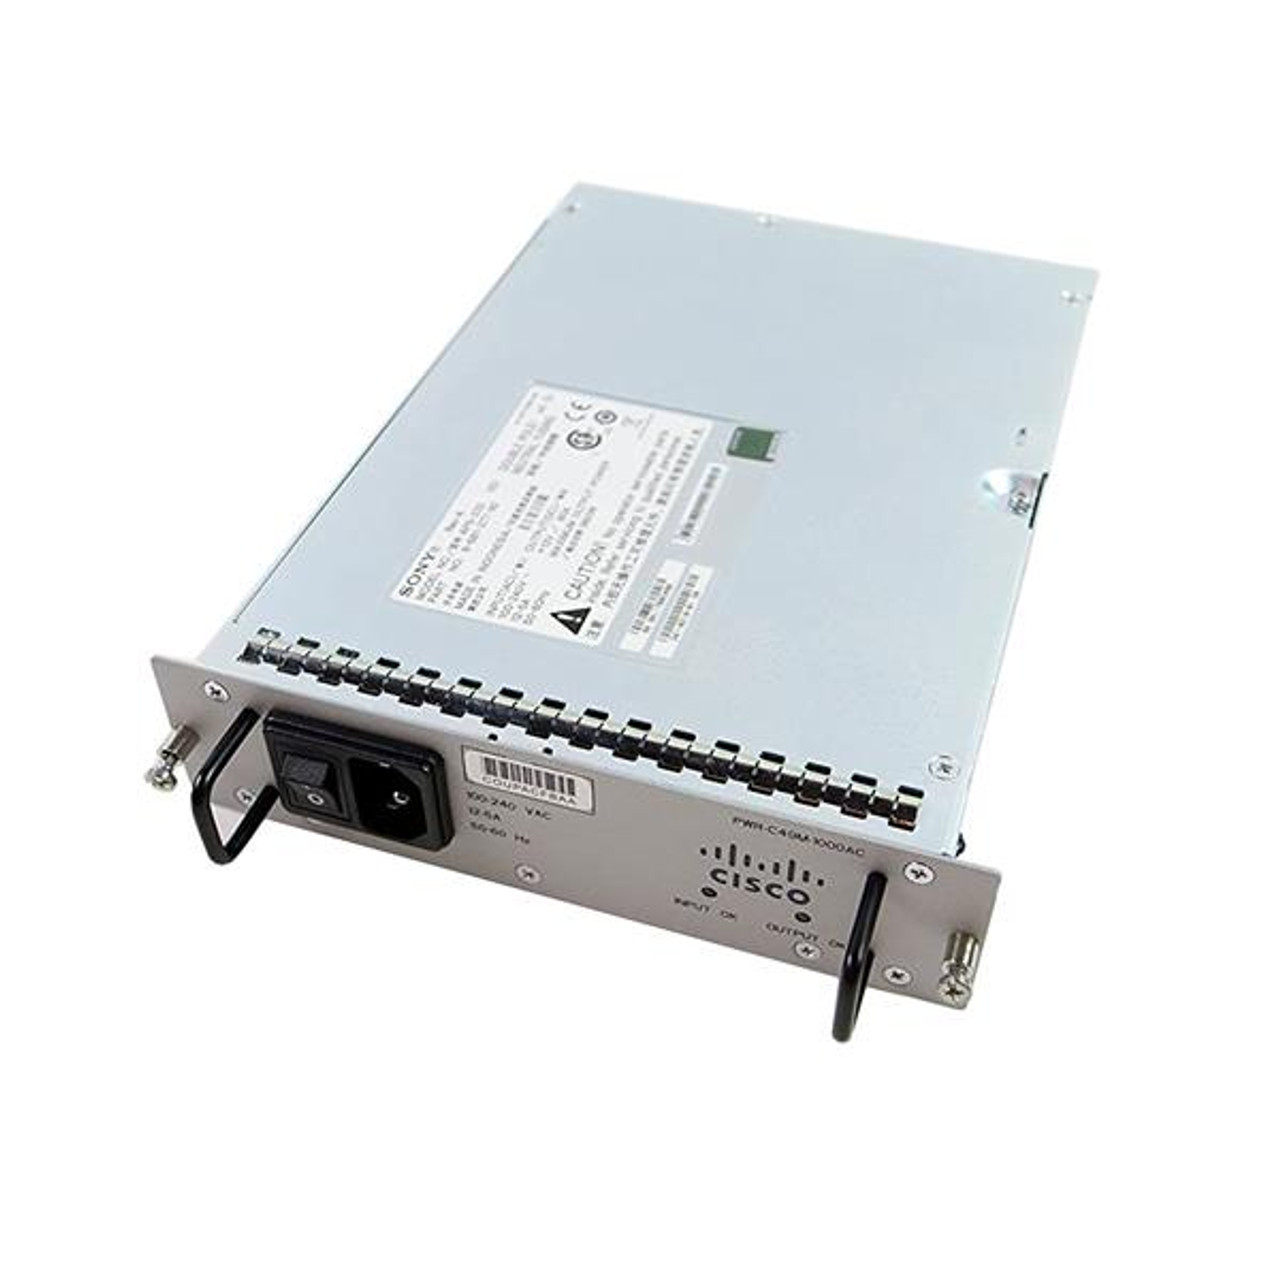 PWR-C49M-1000AC-WITH-EQUAL Cisco 1000-Watt AC Power Supply for Catalyst 4900M Series (Refurbished)